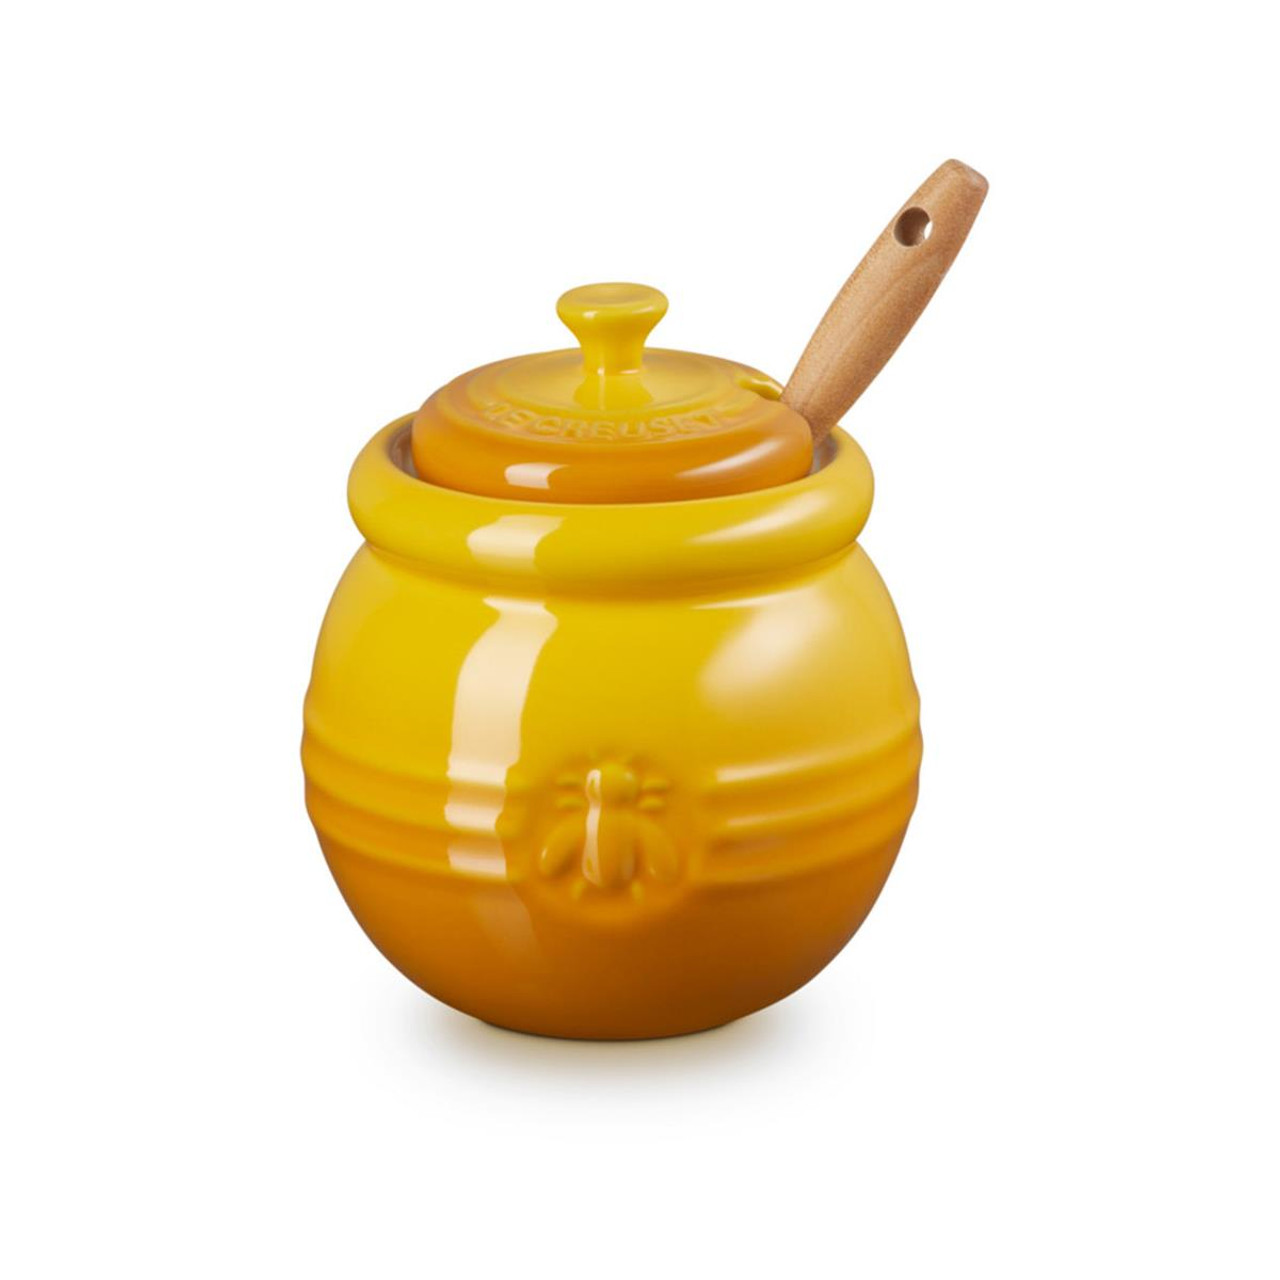 Is the le creuset honey pot simple to clean?